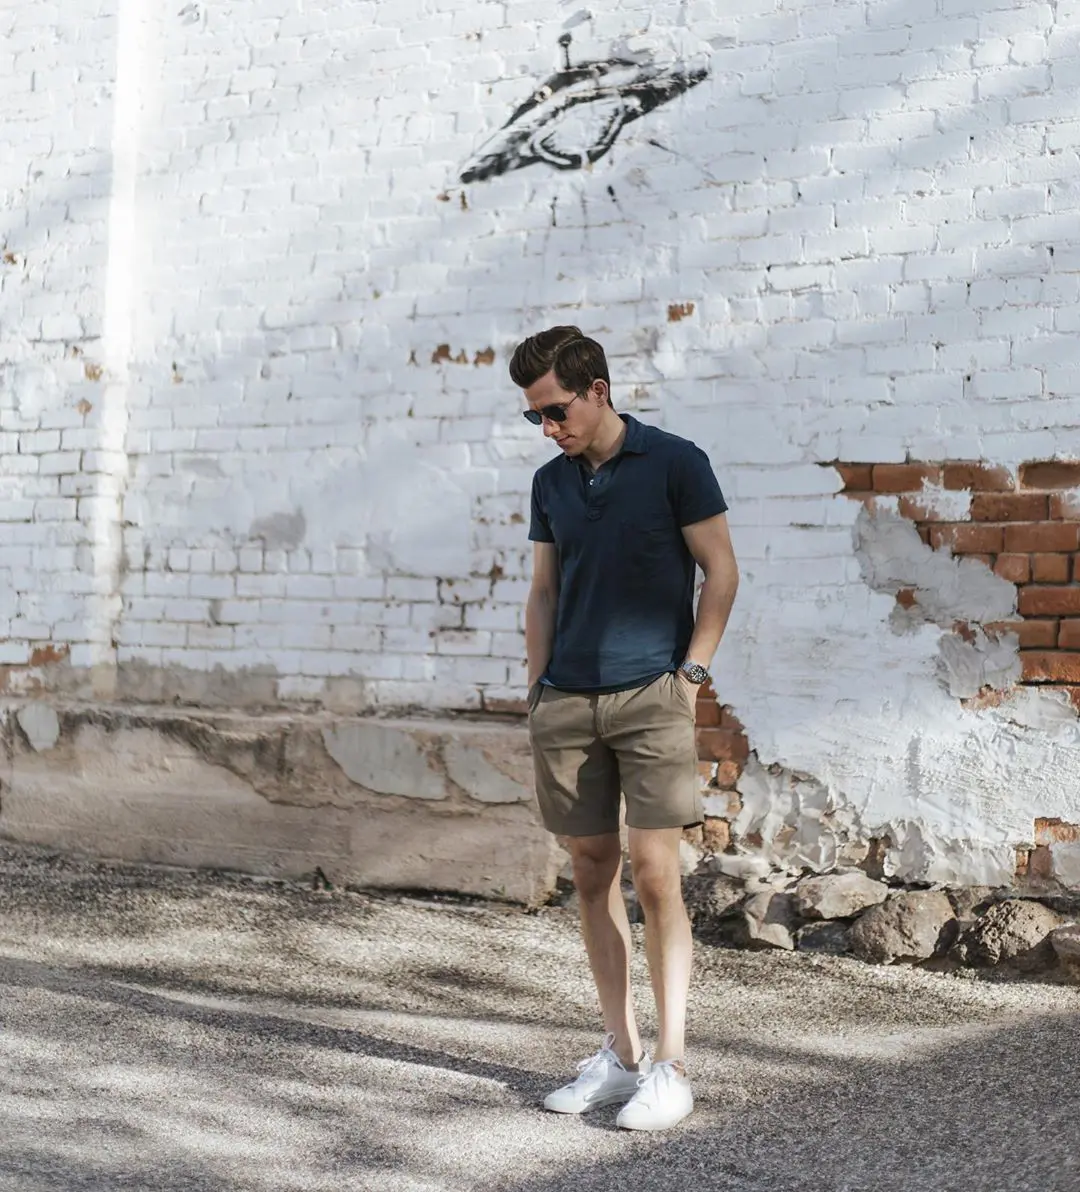 The 13 Best Men's Chino Shorts (2022 Guide) - The Modest Man